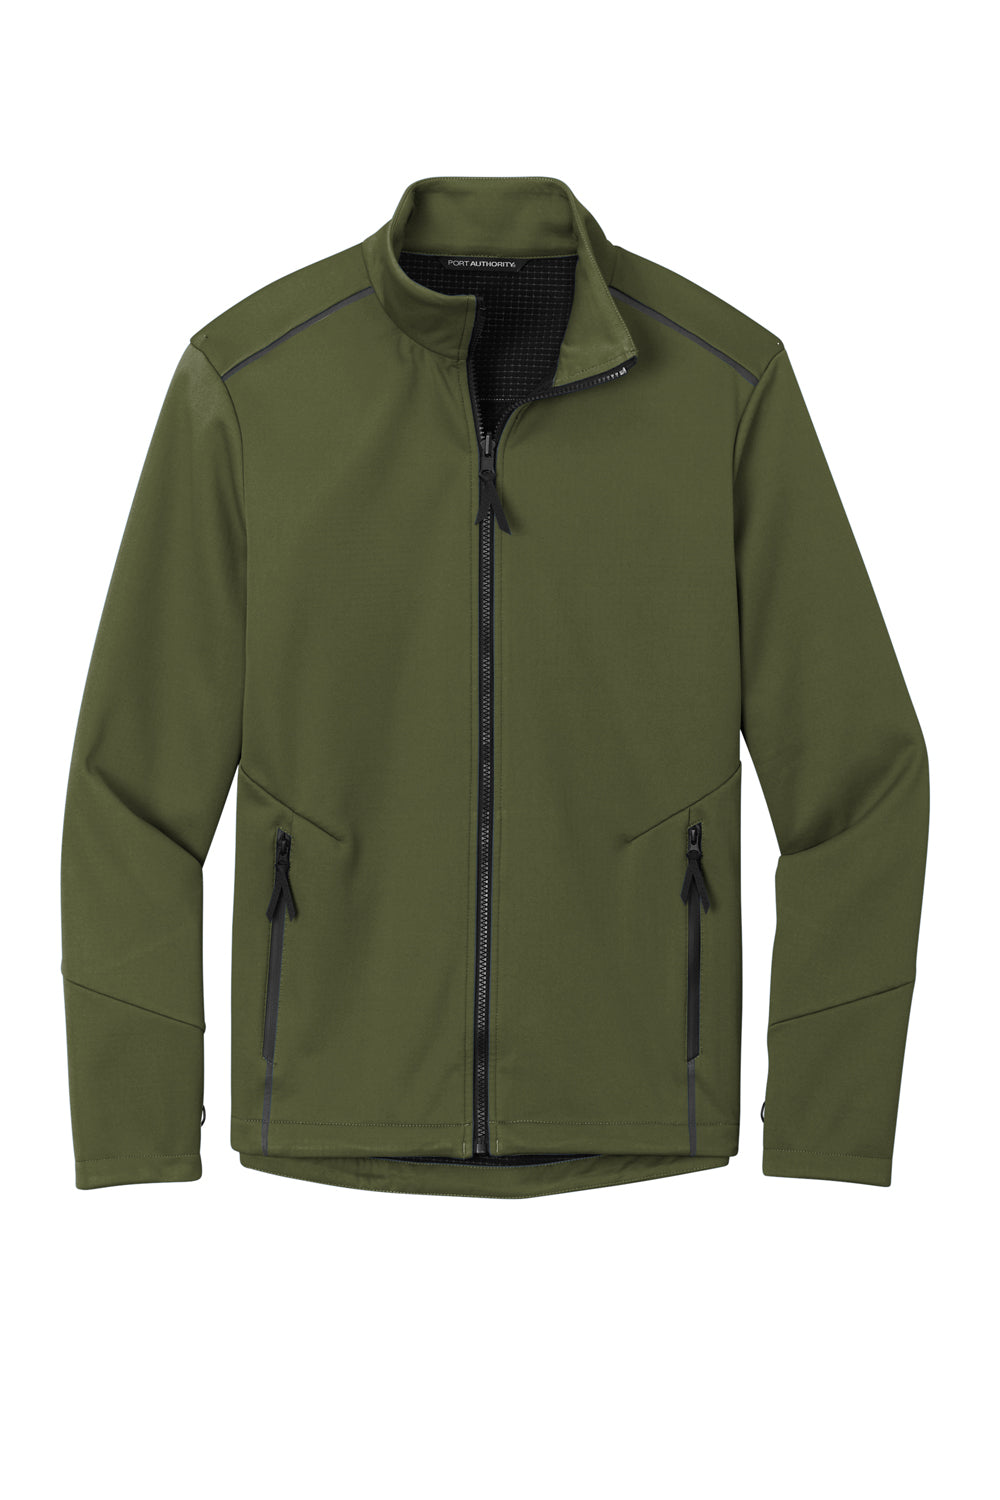 Port Authority J921 Collective Tech Full Zip Soft Shell Jacket Olive Green Flat Front